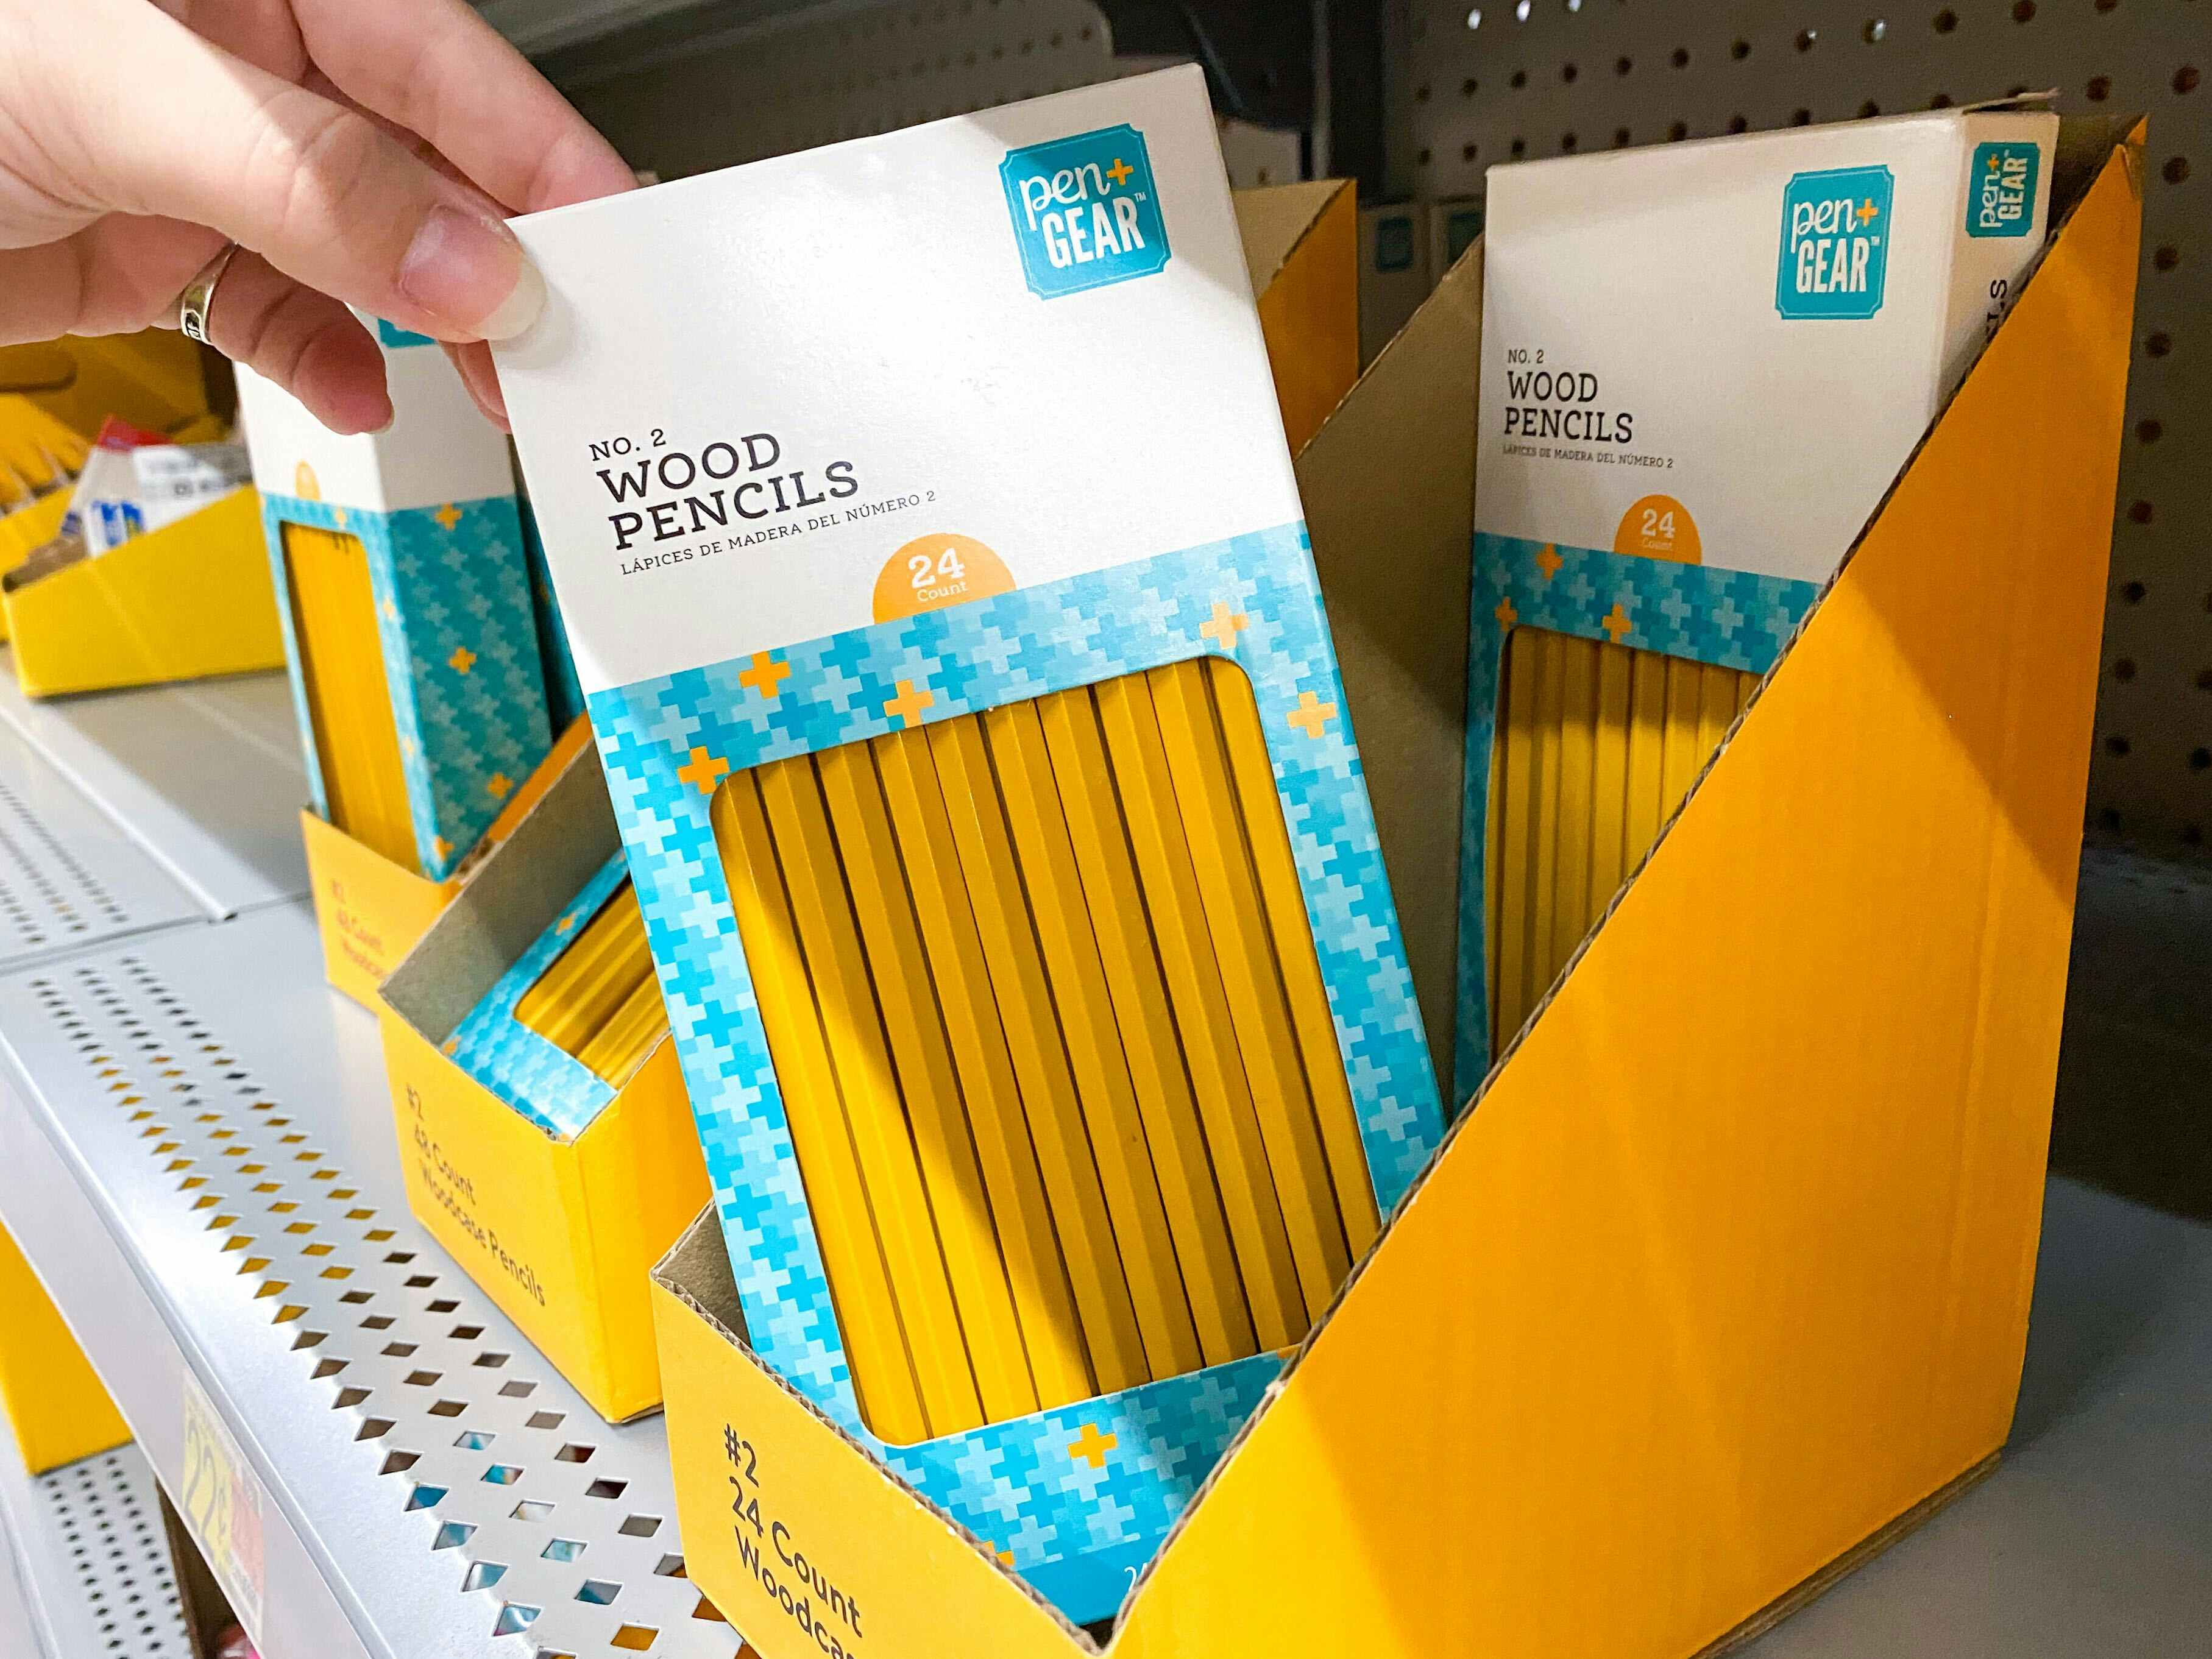 A person's hand taking a box of Pen+Gear pencils from a shelf at Walmart.